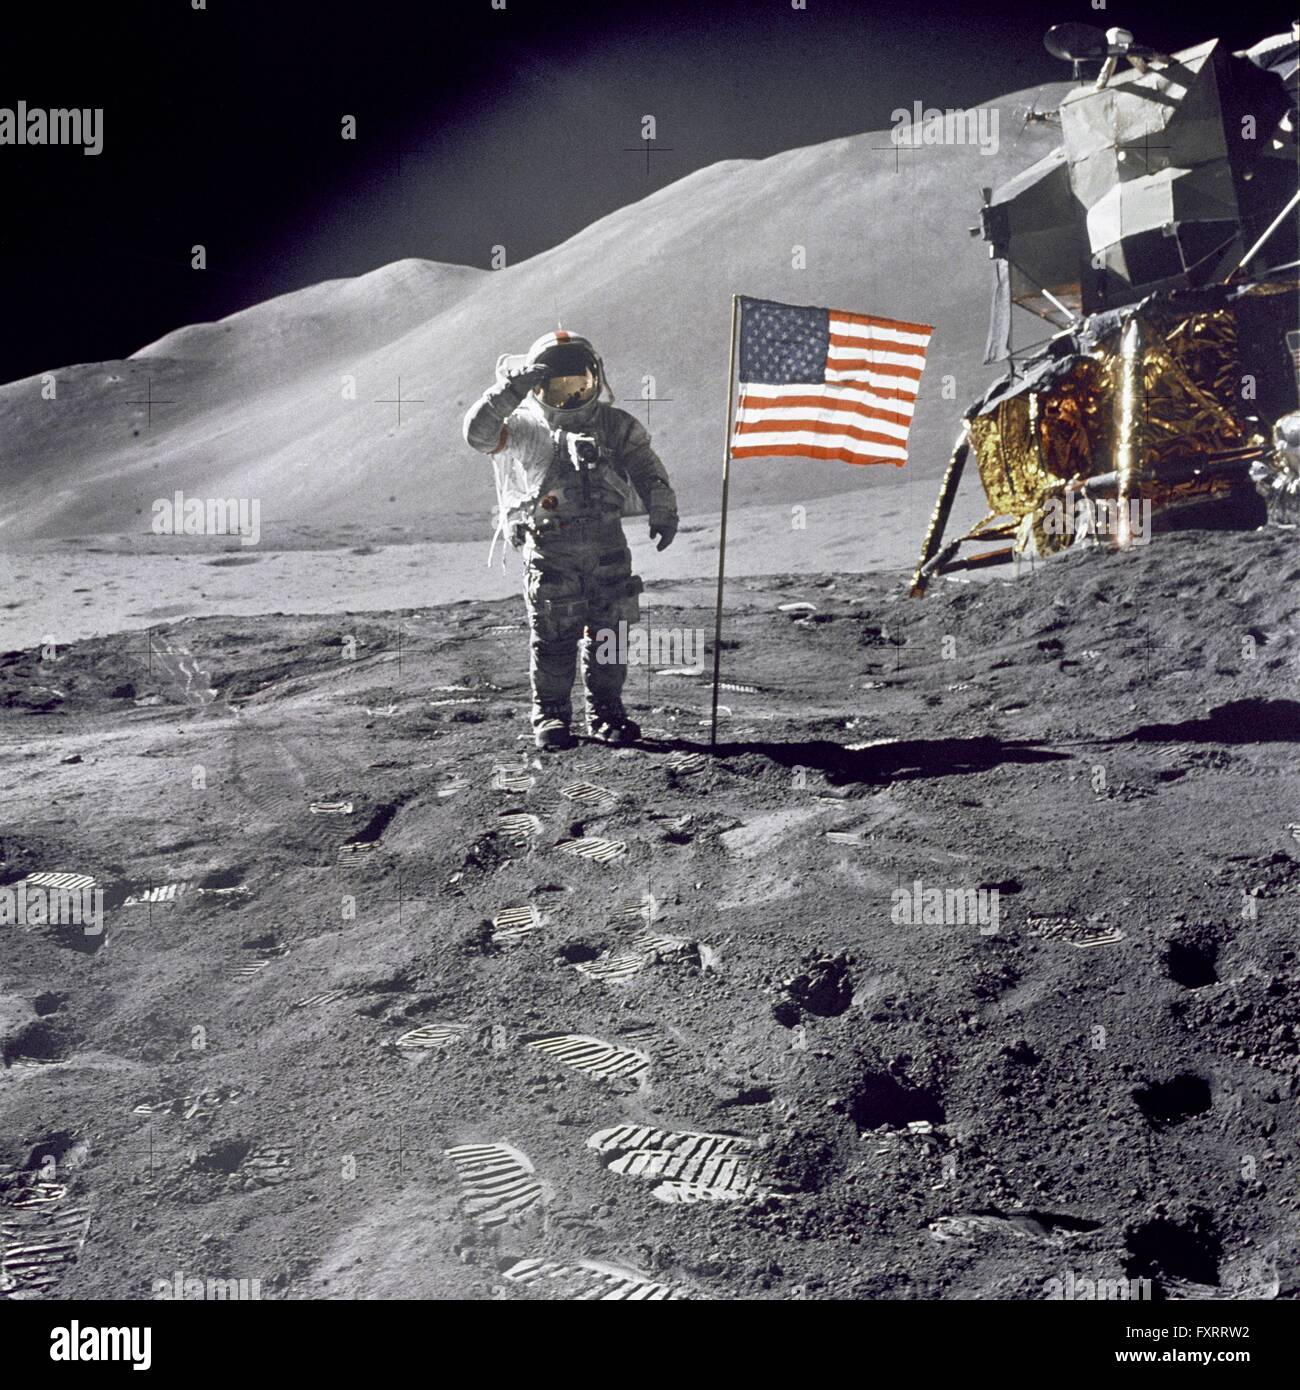 NASA astronaut and Commander Dave Scott salutes the deployed United States flag during an Apollo 15 extravehicular activity on the lunar surface August 1, 1971 in Hadley-Apennine, Moon. Stock Photo